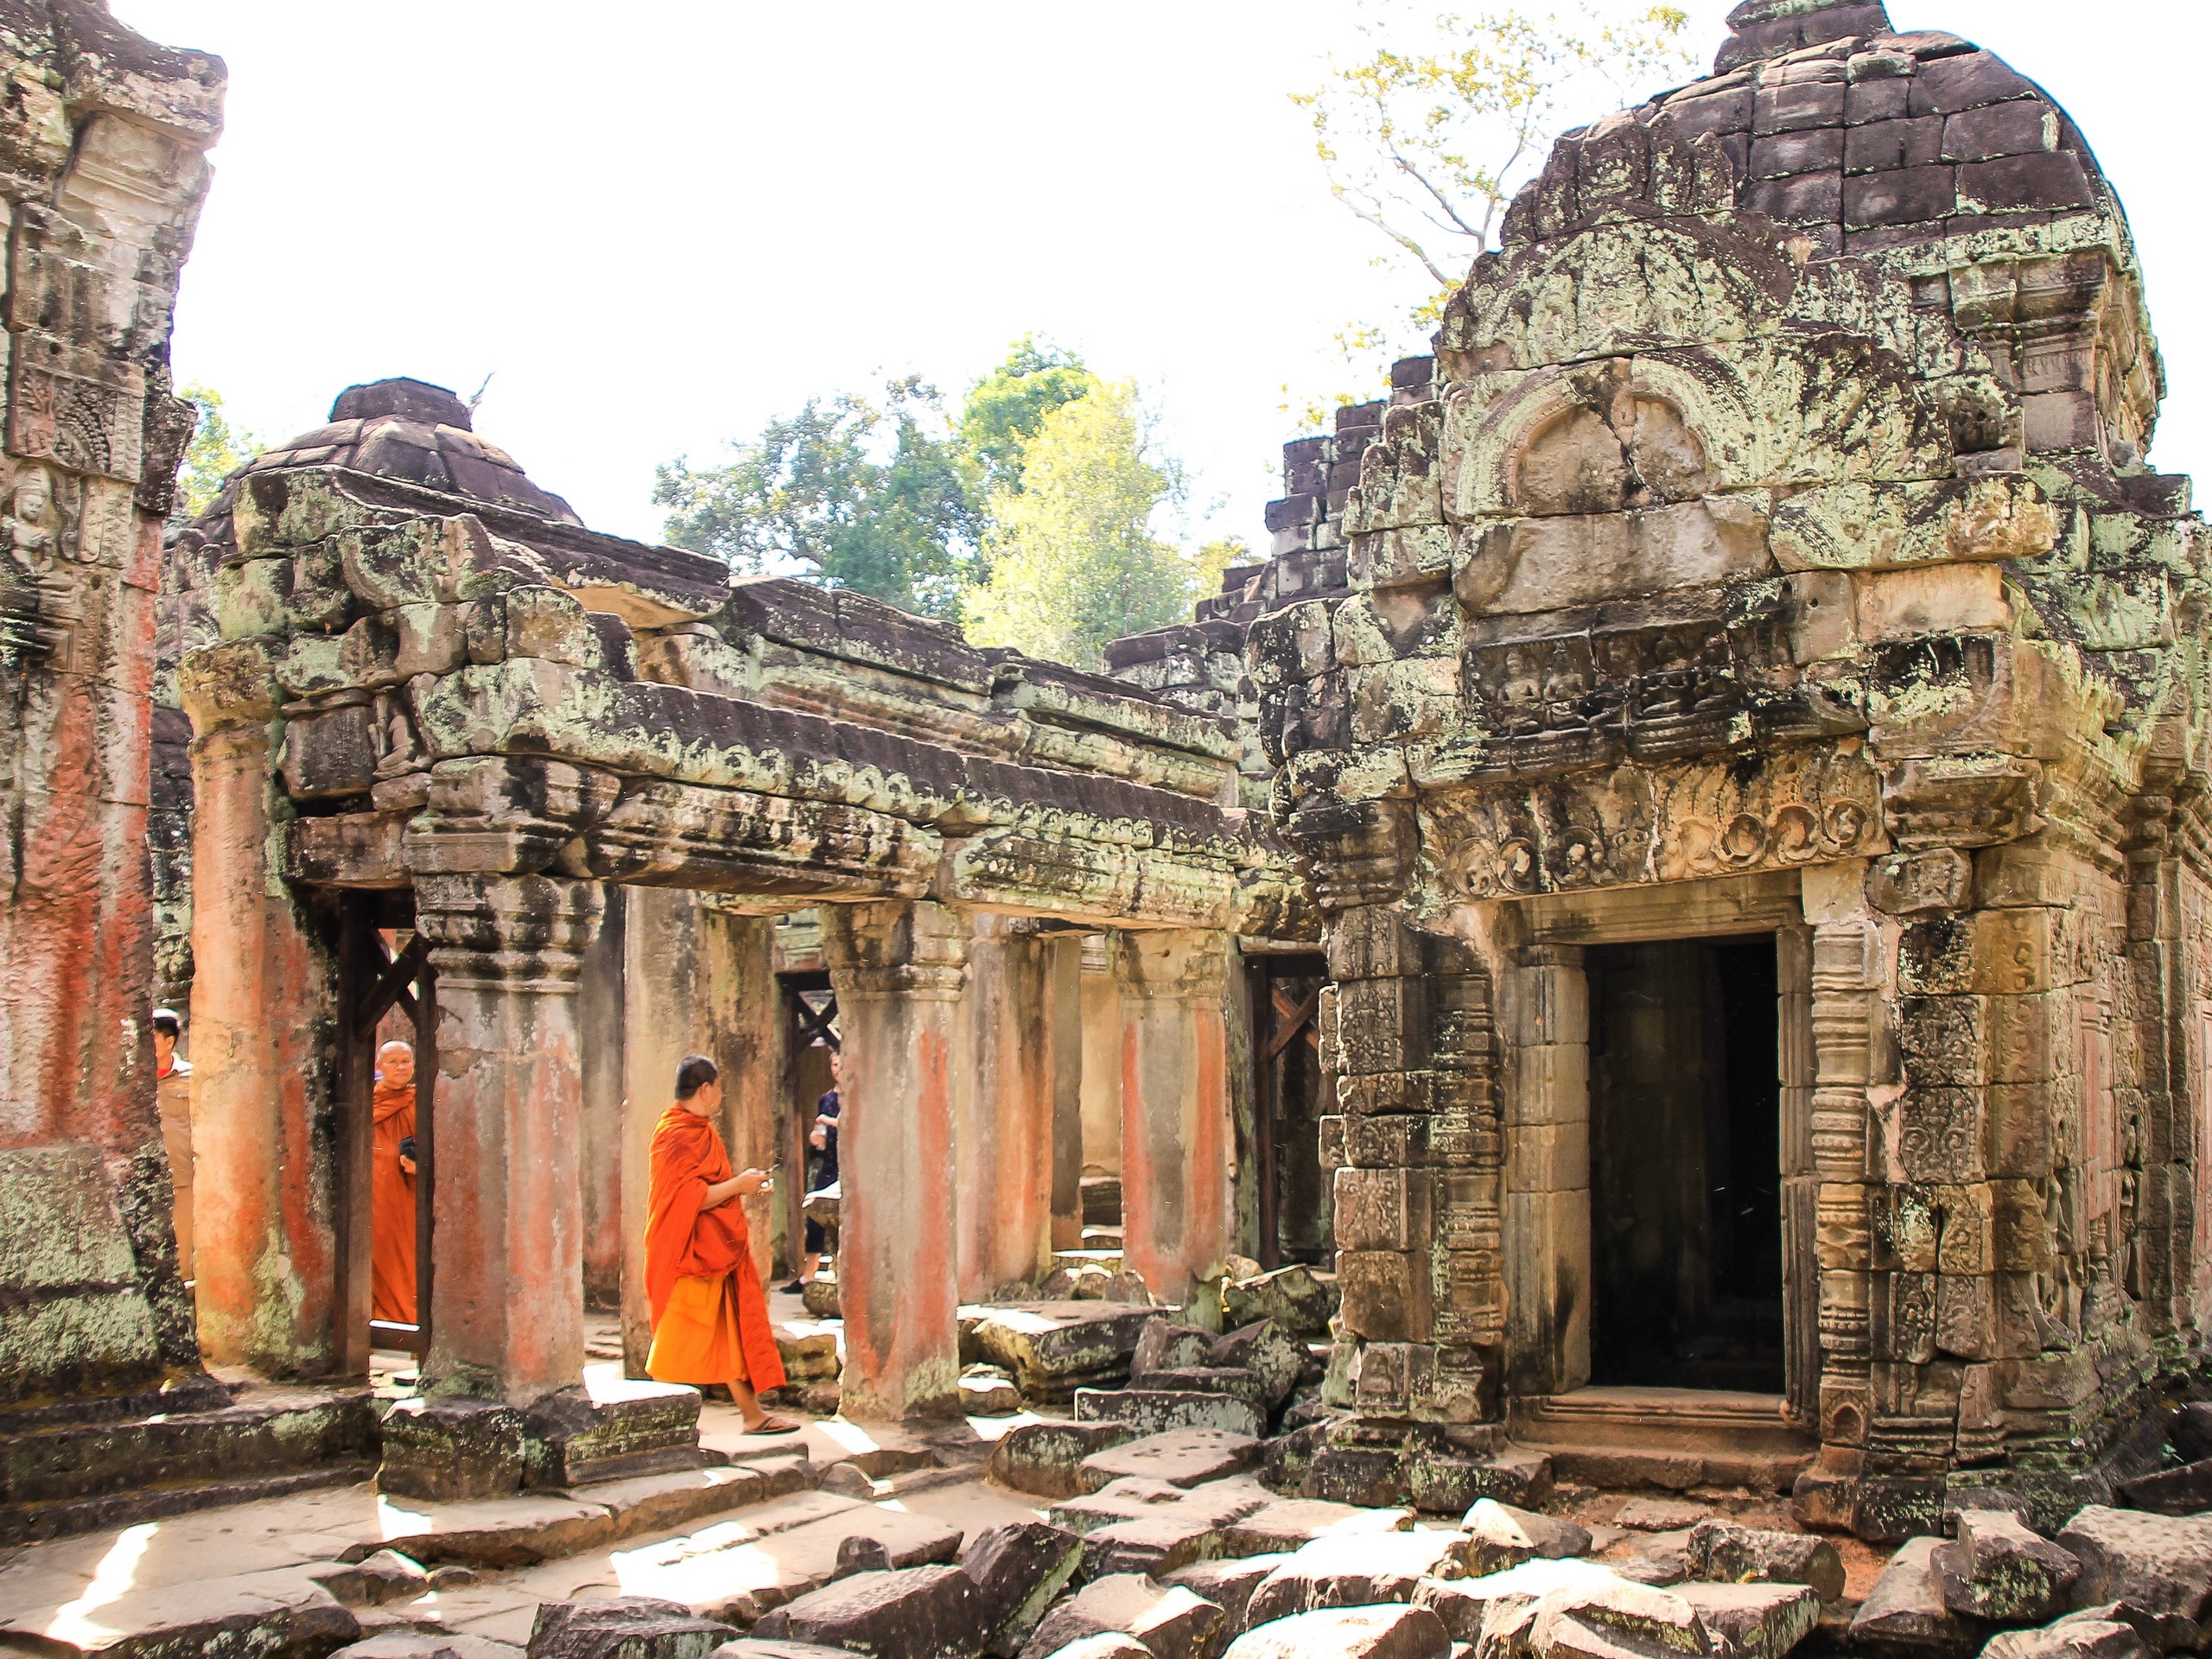 Visiting the stunning Angkor Wat while on a guided trip in Cambodia